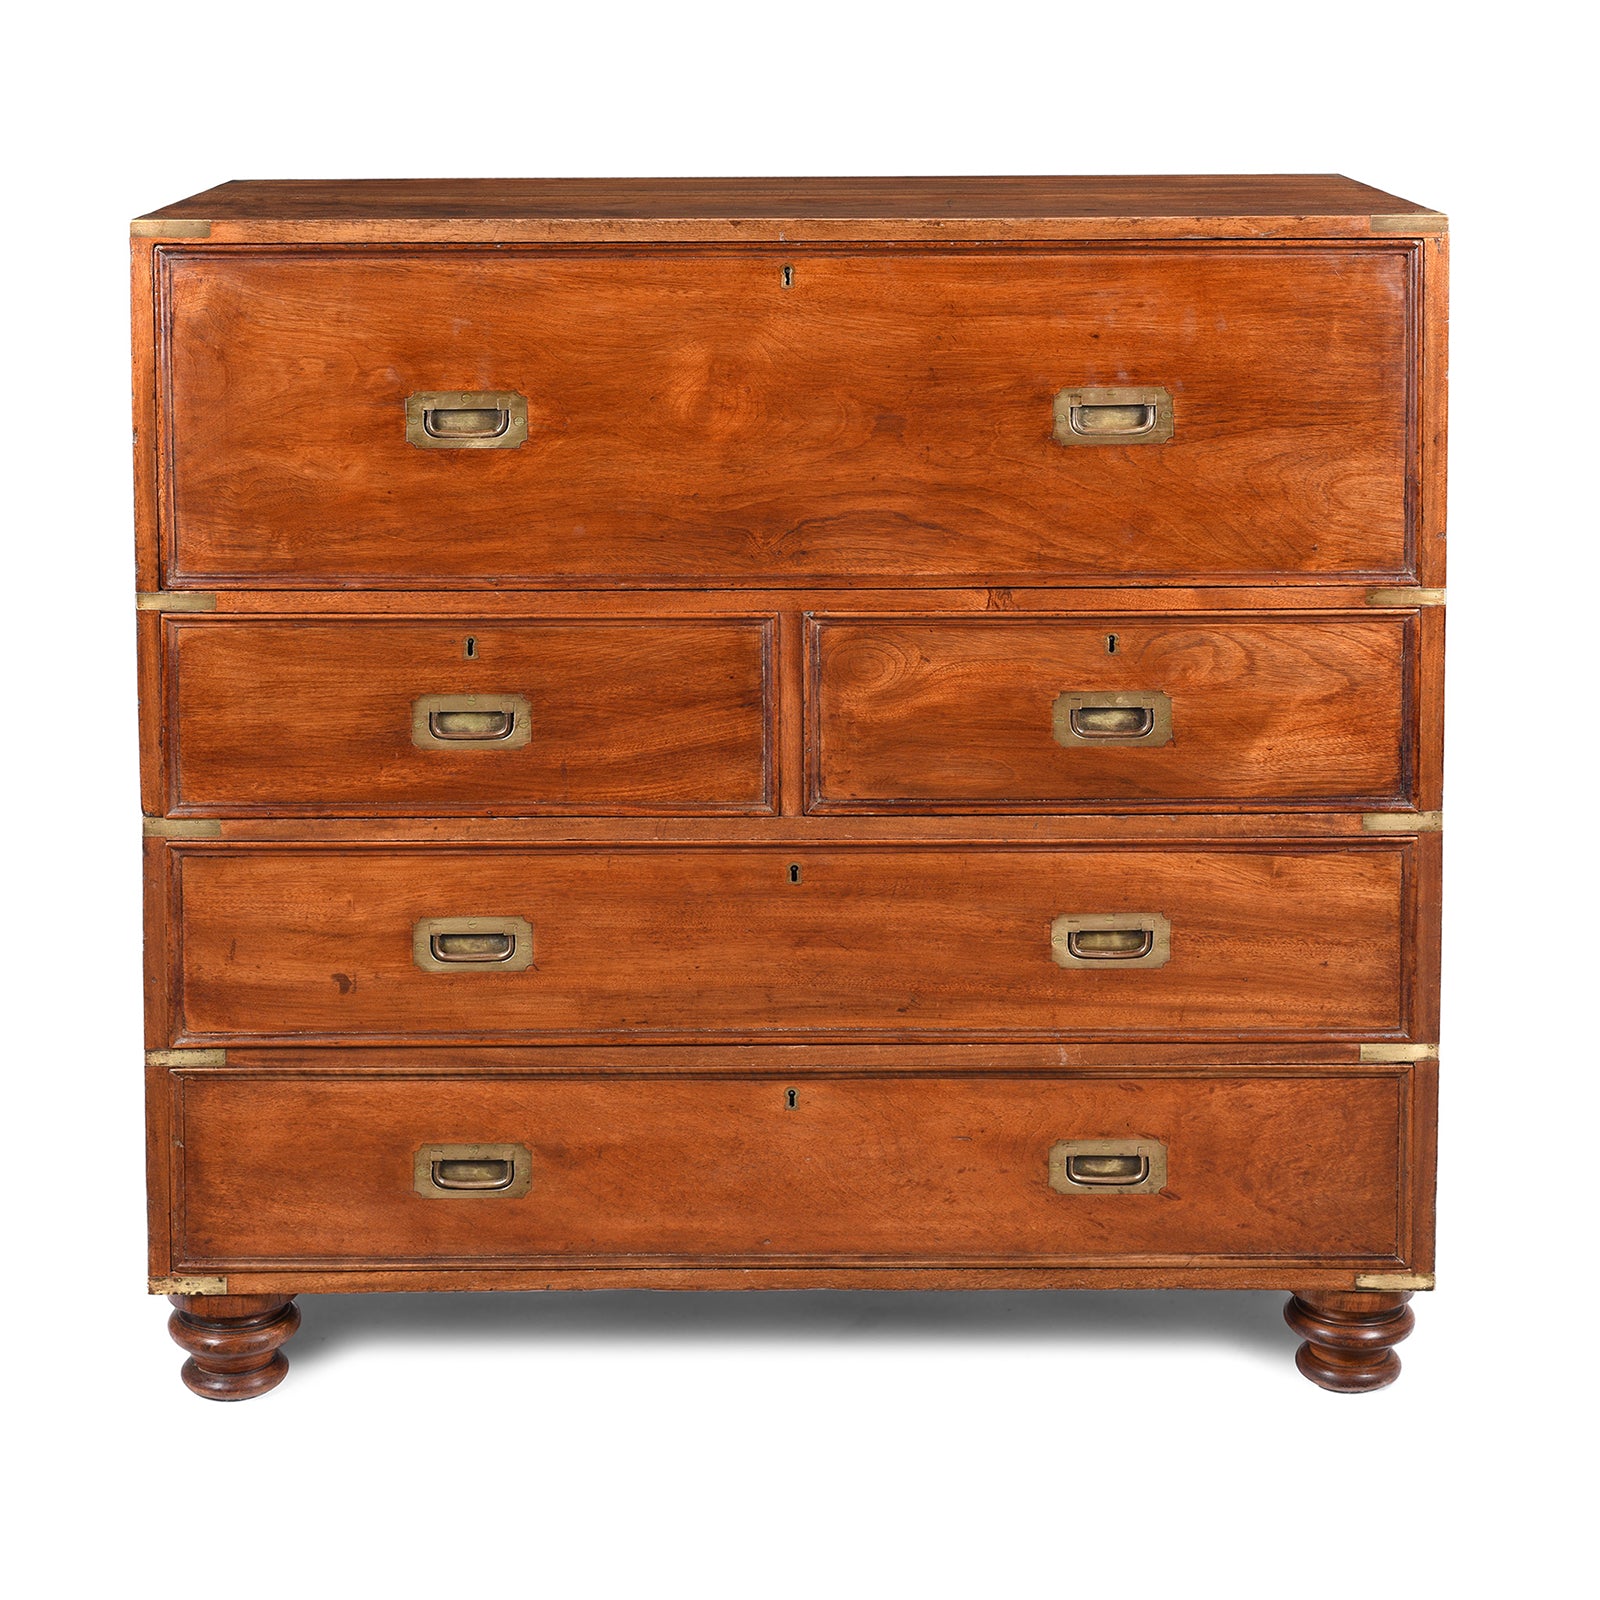 Brass Bound Chinese Export Secretaire Campaign Chest Made From Camphor Wood- Late 19thC